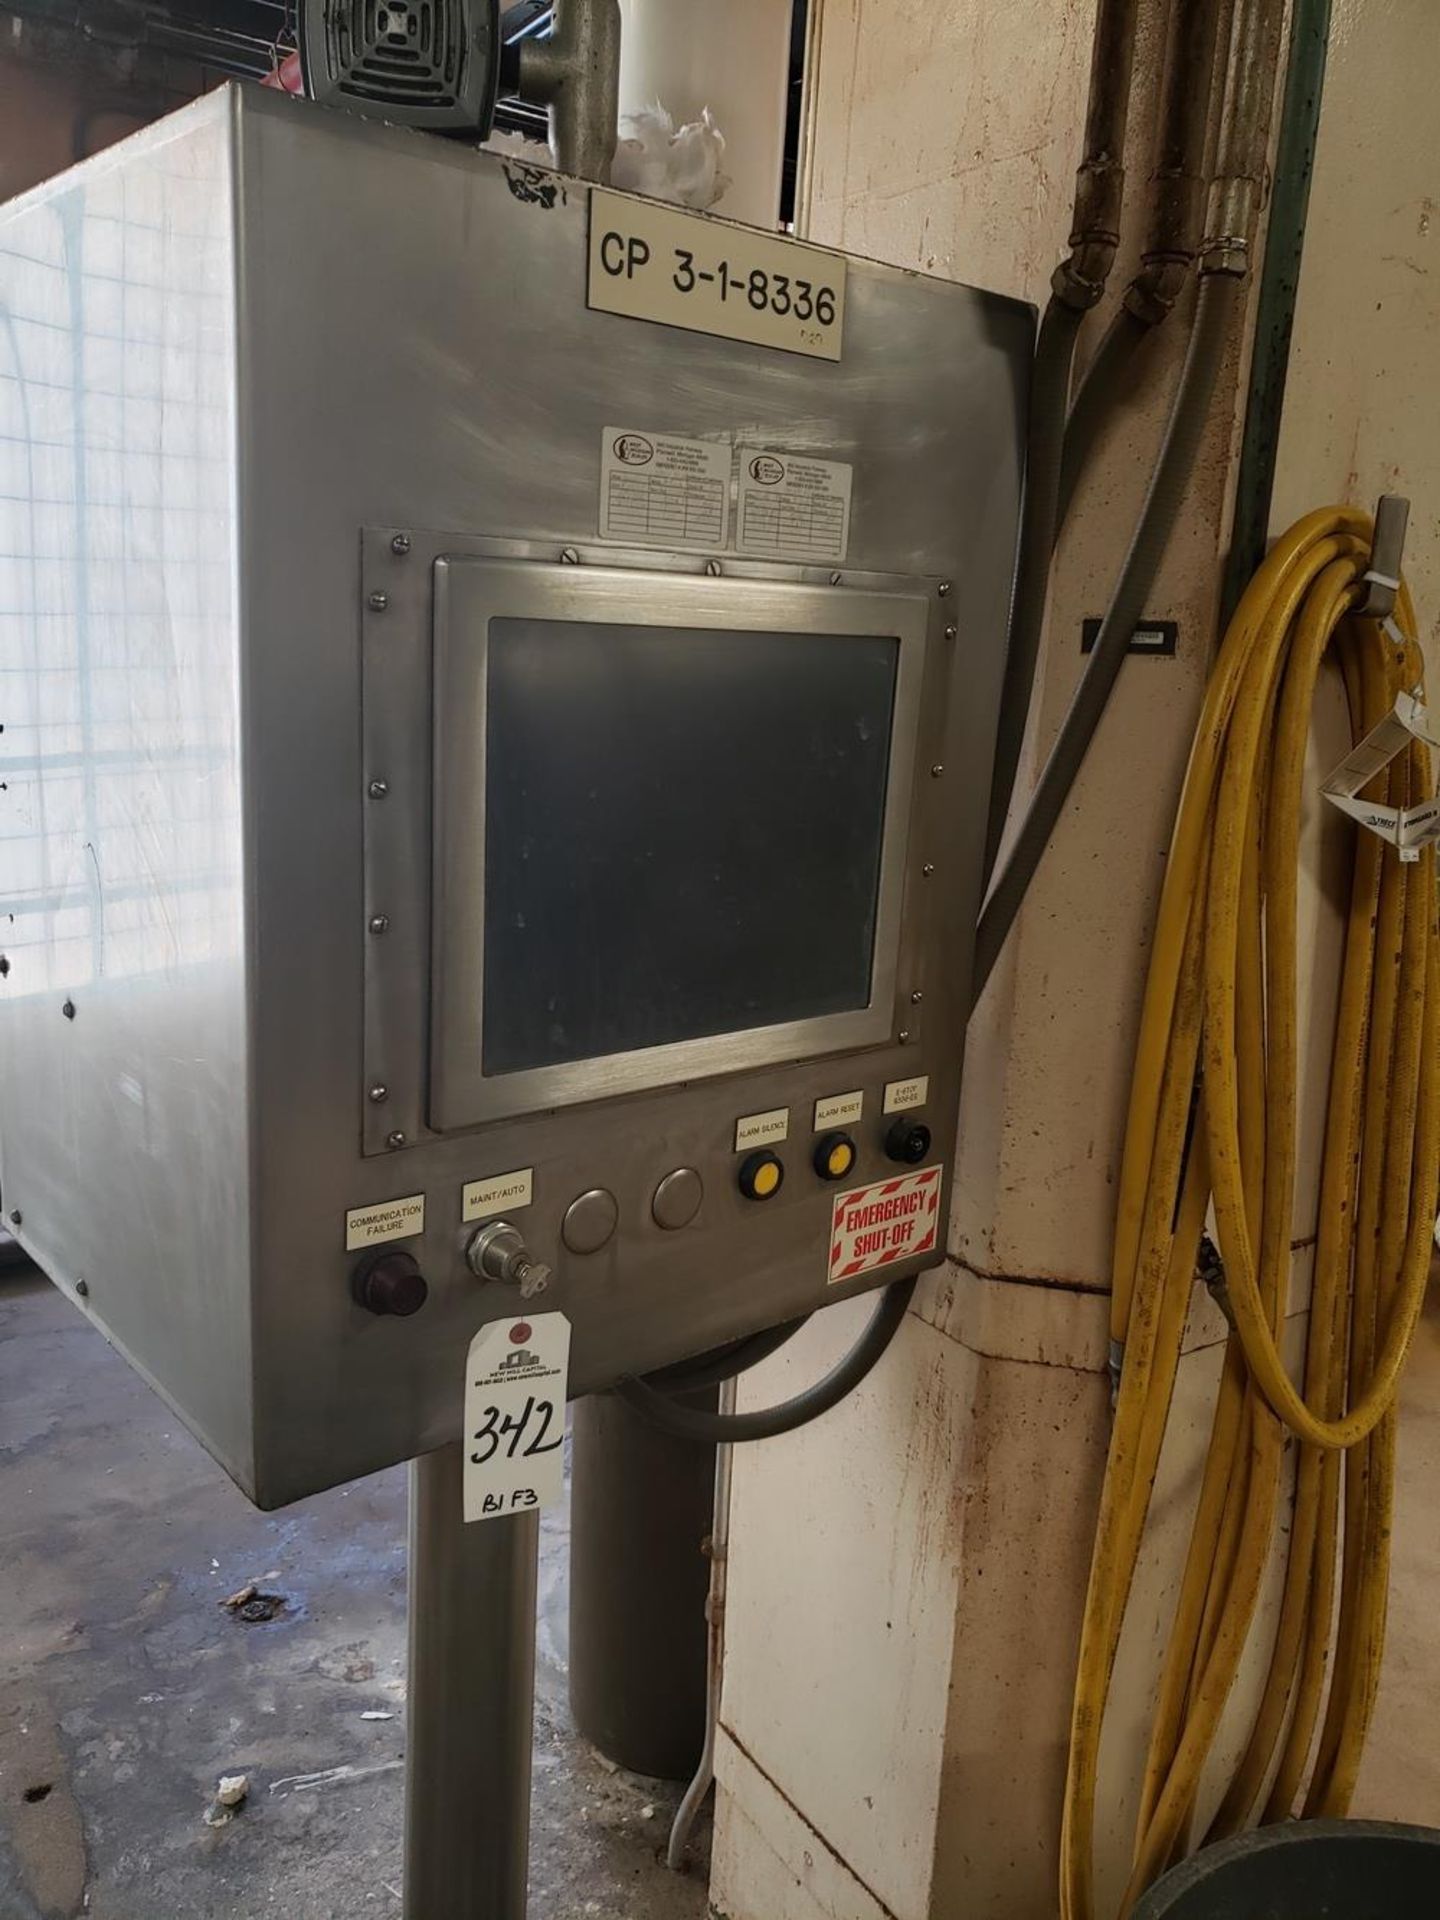 Touch Screen Control Panel | Rig Fee: $100